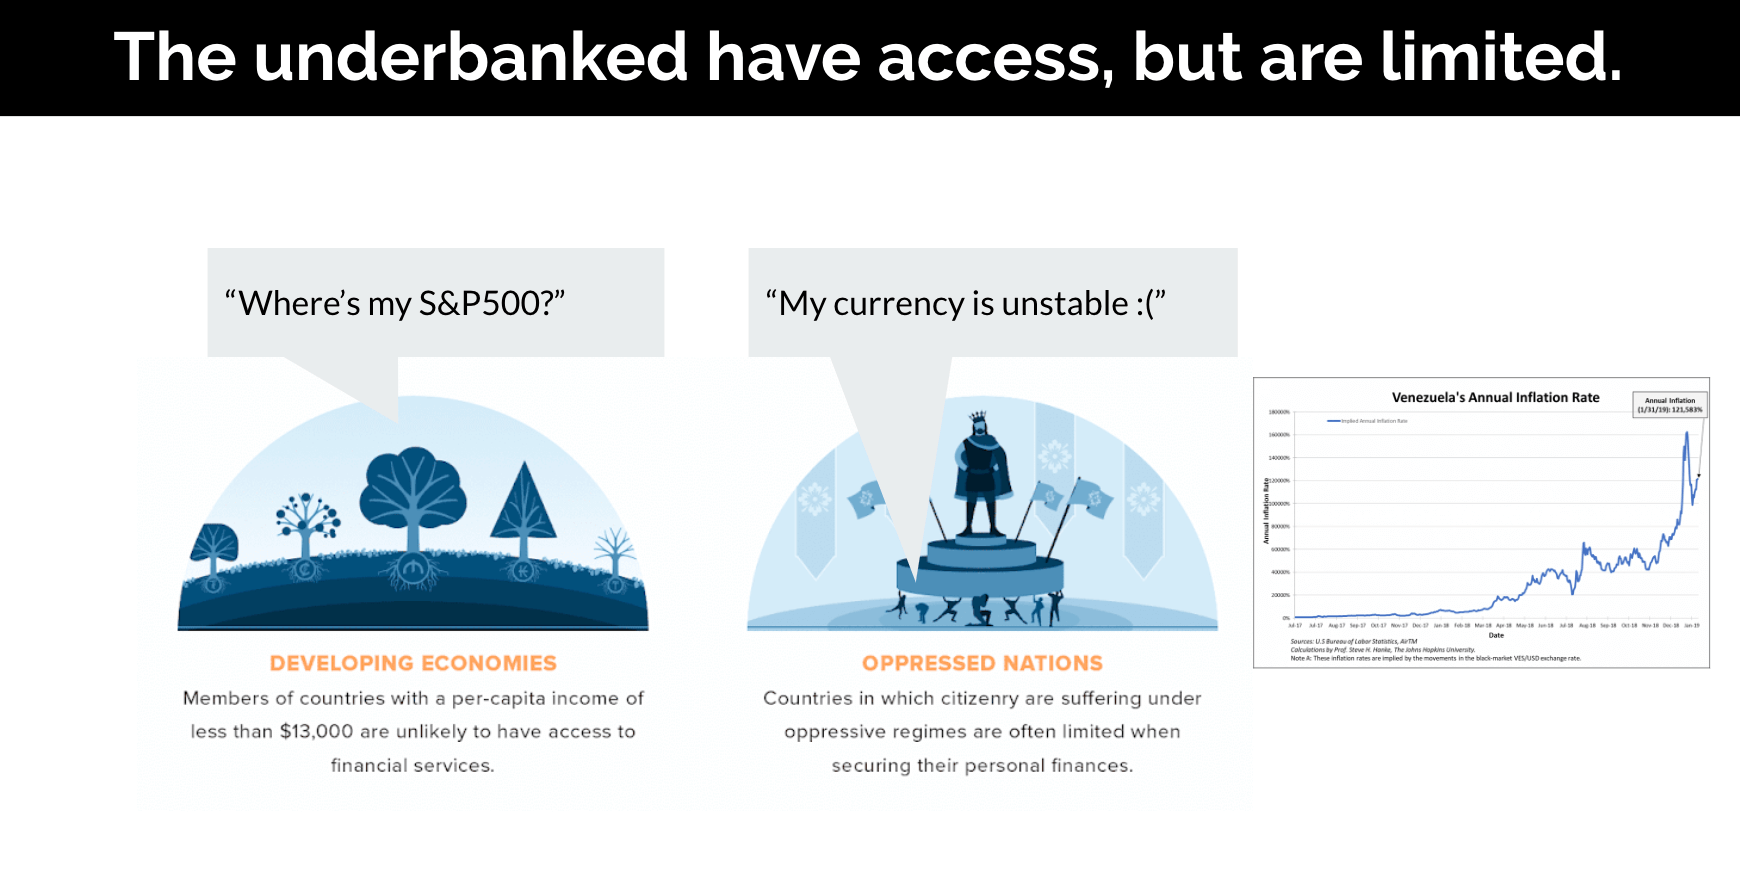 The underbanked have access, but are limited.